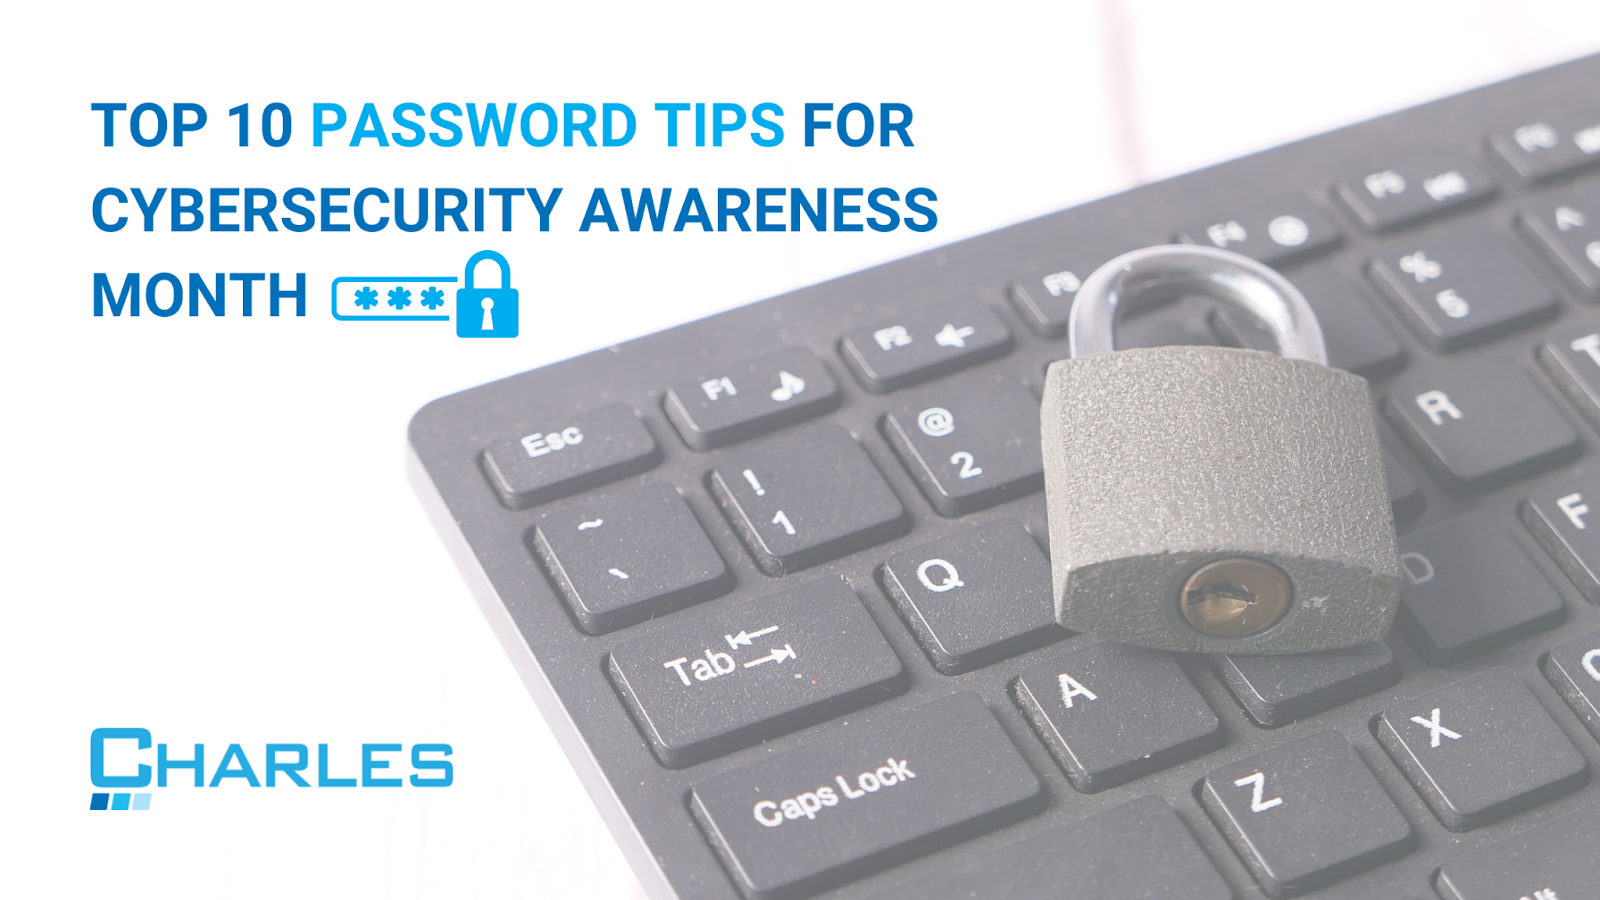 Top 10 Password Tips for Cybersecurity Awareness Month